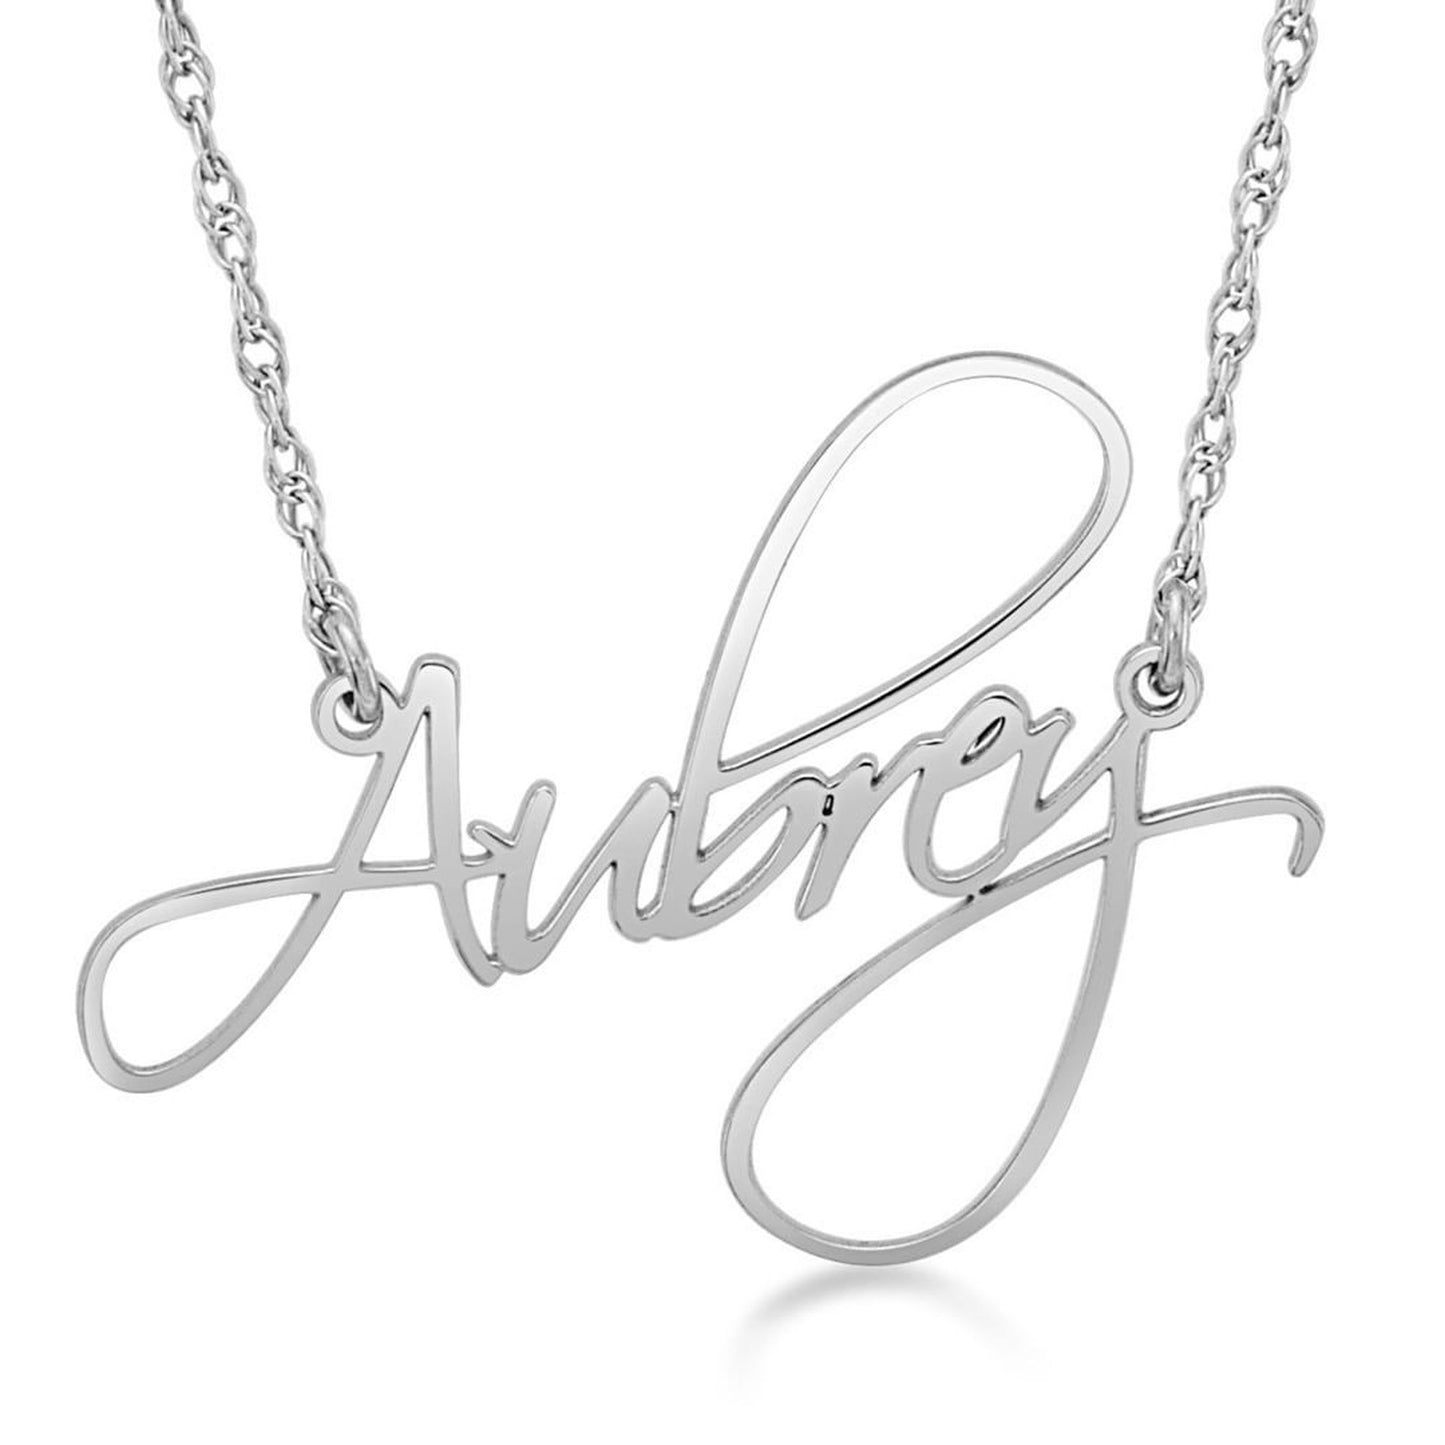 Detailed view of silver link chain with a custom-made script name necklace from CustomNameJewelry.com.